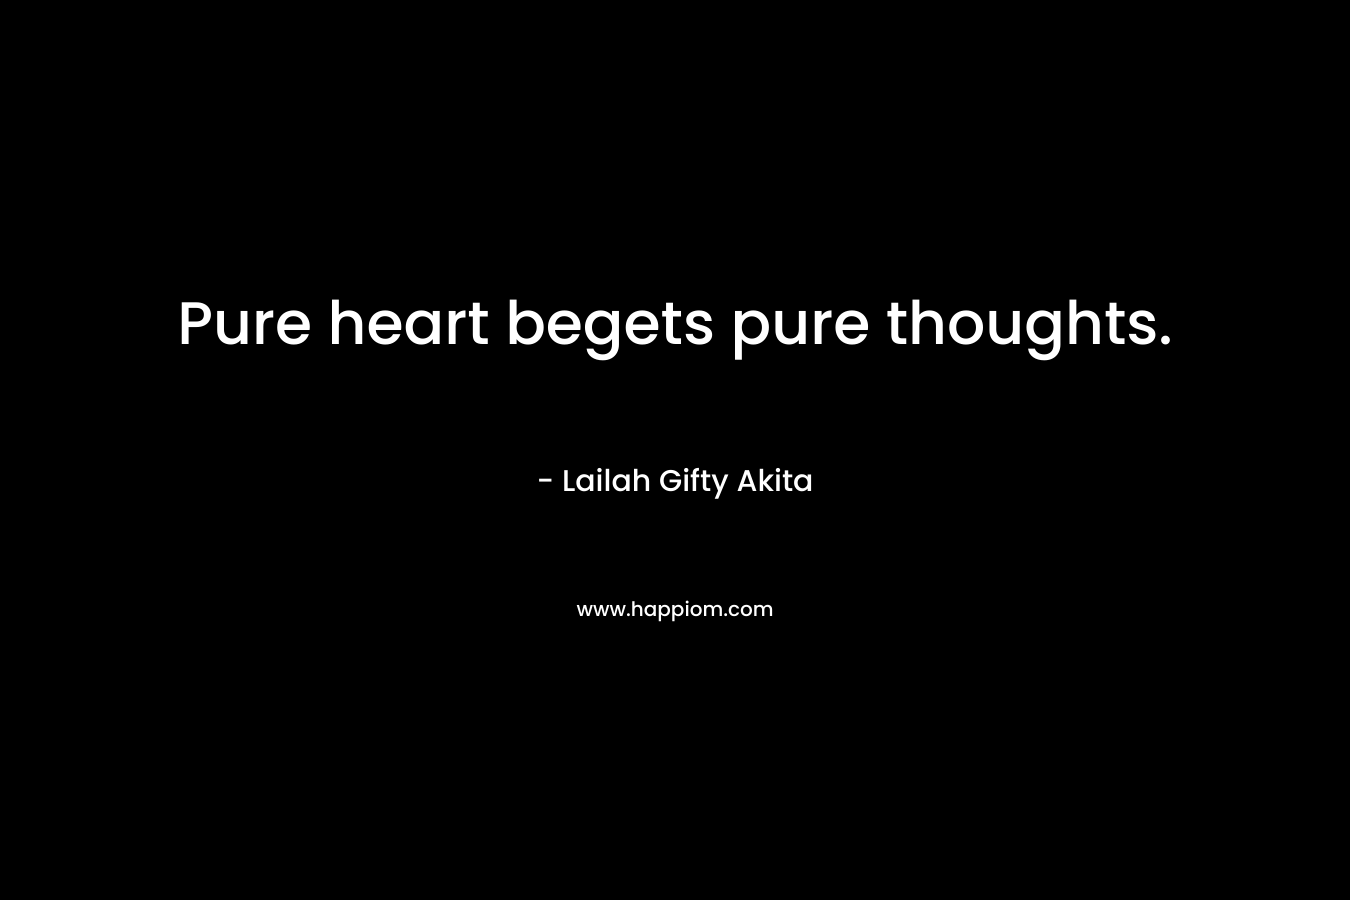 Pure heart begets pure thoughts.